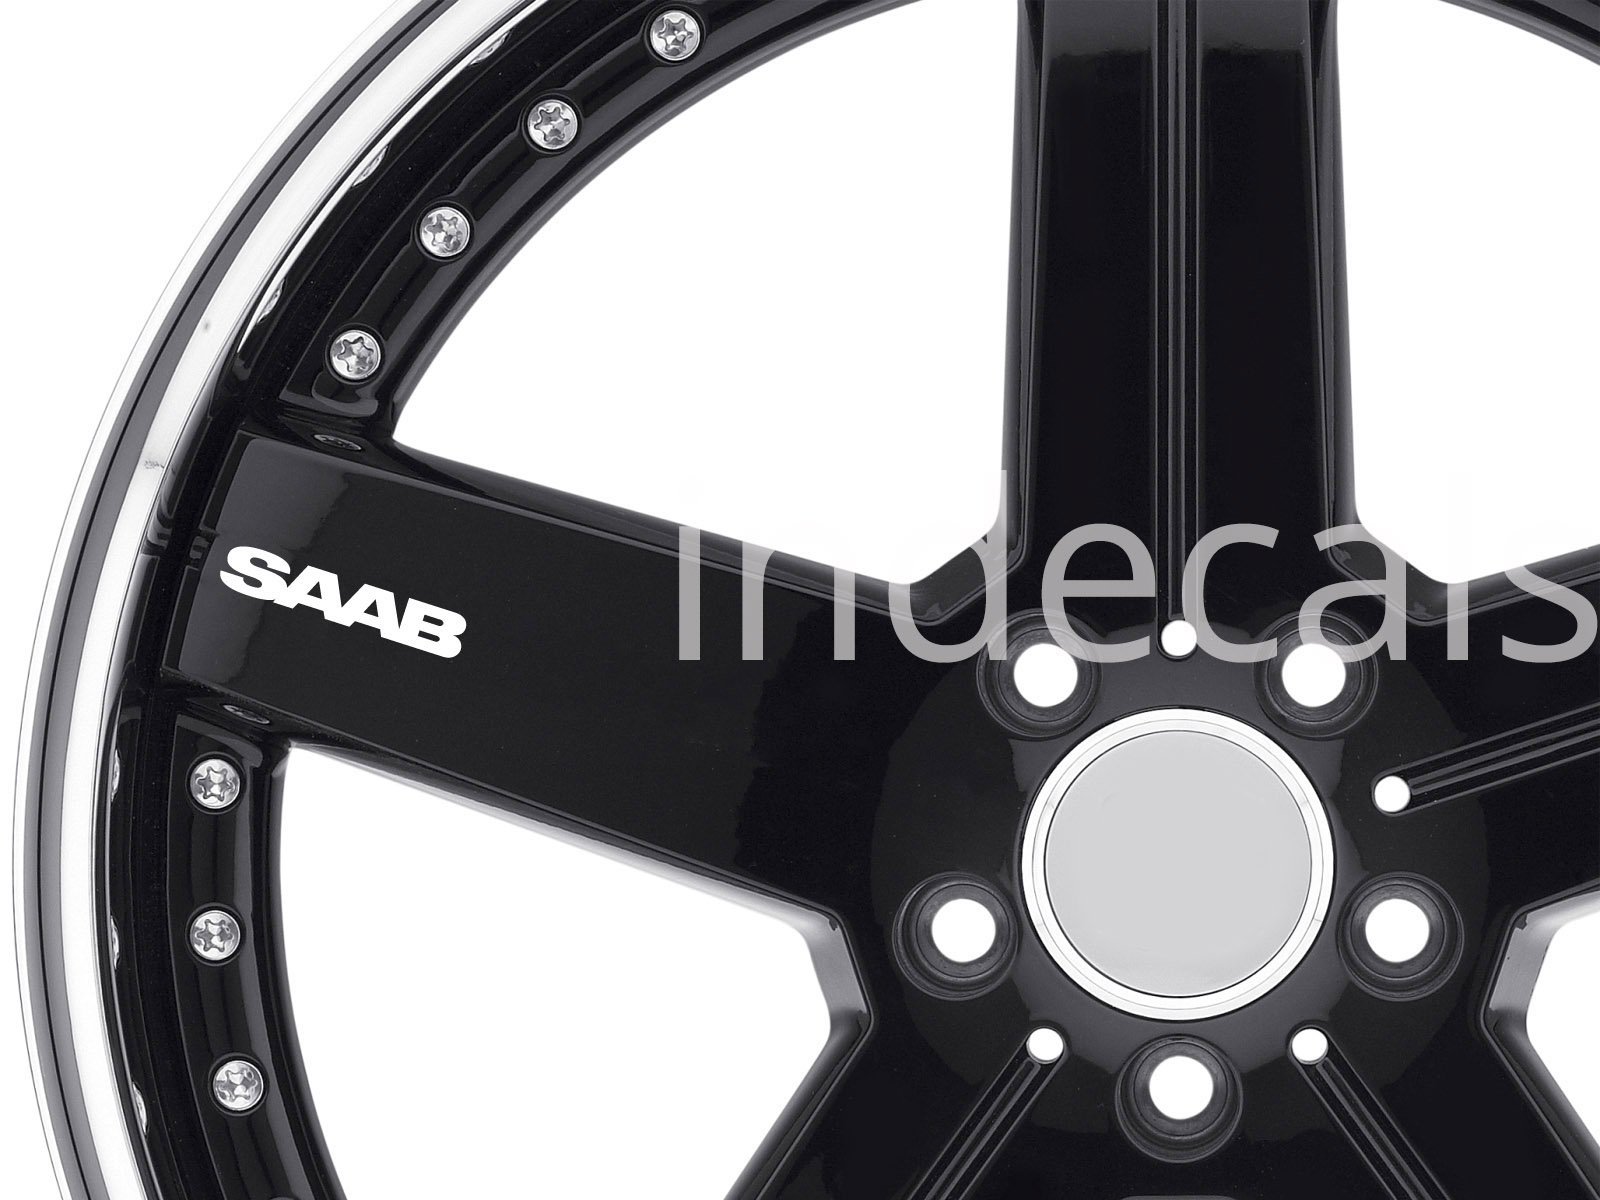 6 x Saab Stickers for Wheels - White